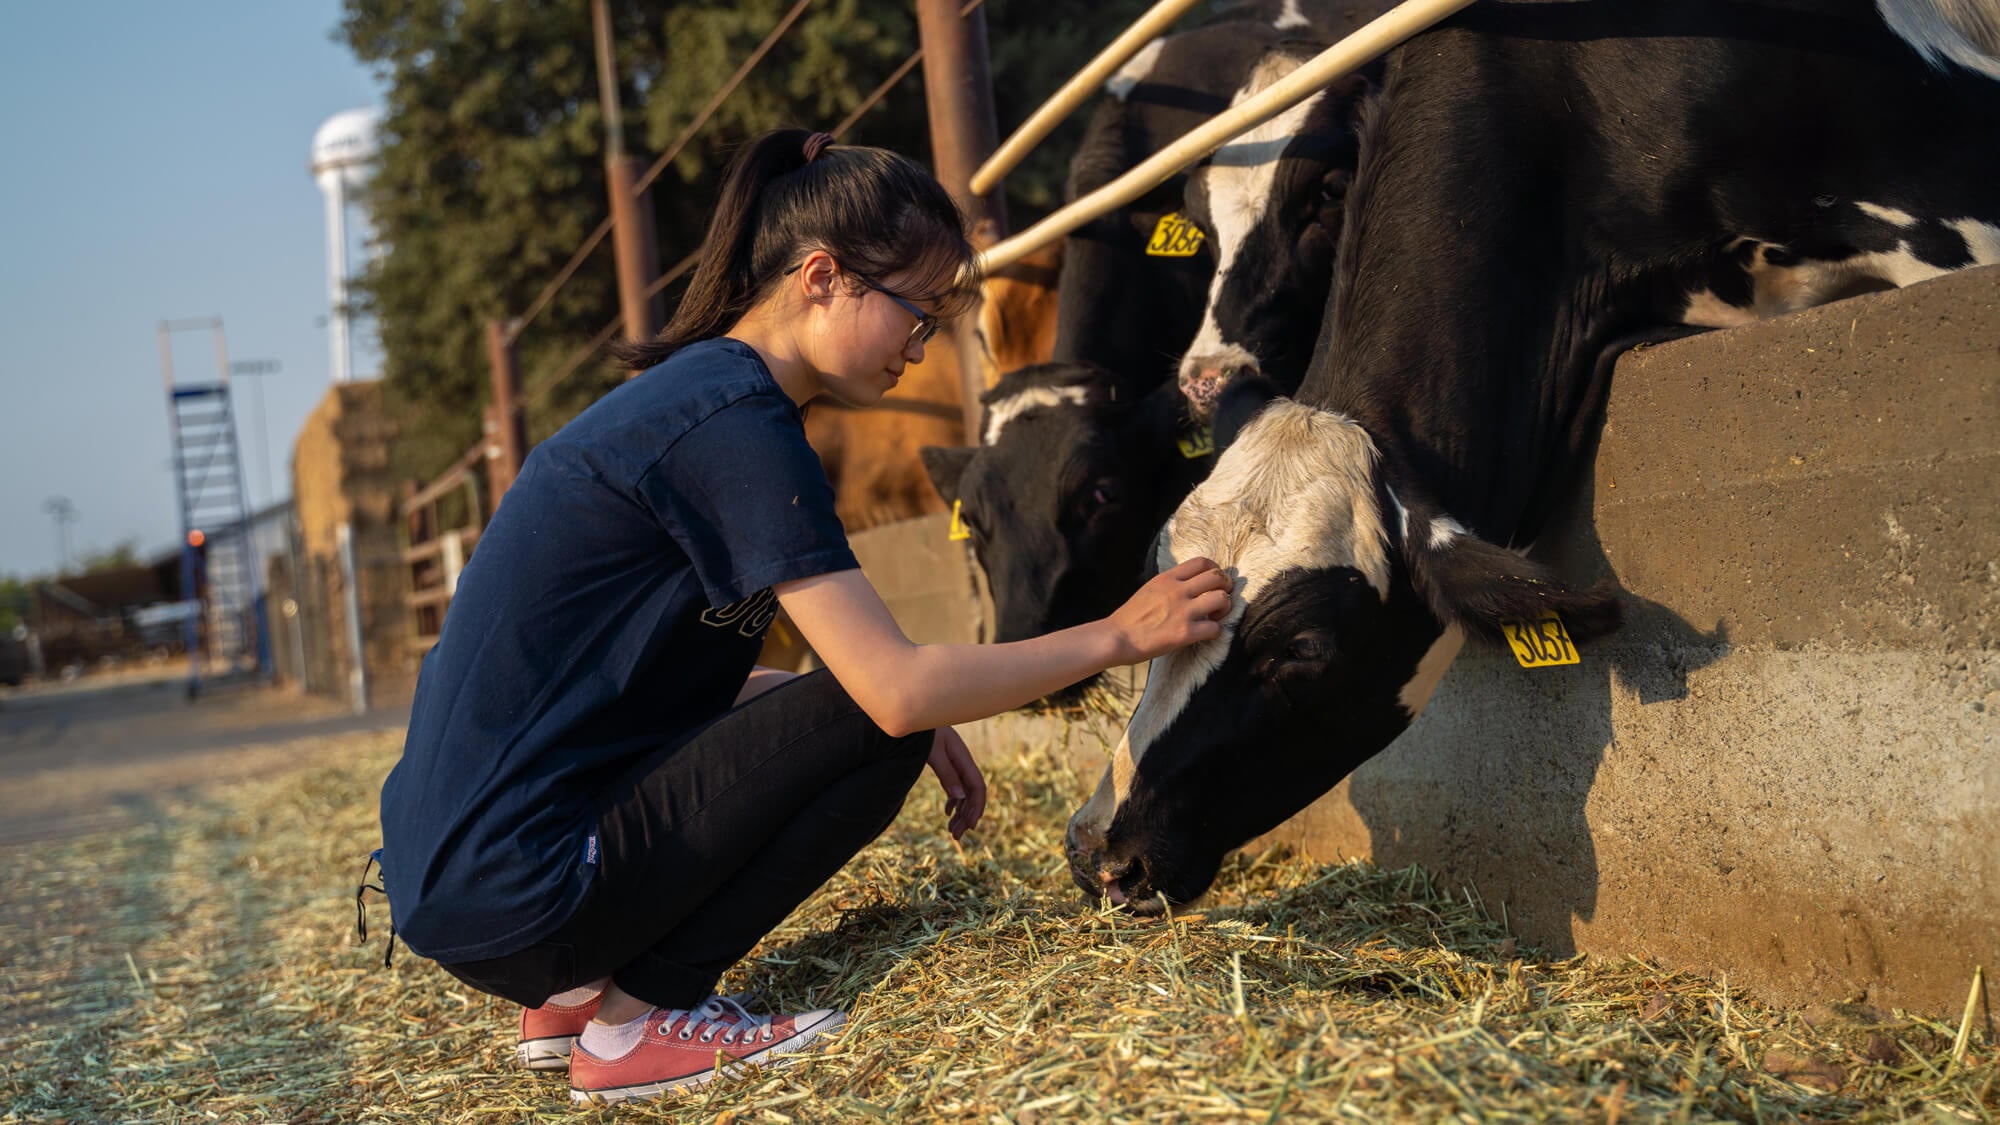 A student in a dark blue t-shirt and glasses crouches to pet black and white dairy cows behind a fence at ˽̳ Davis.